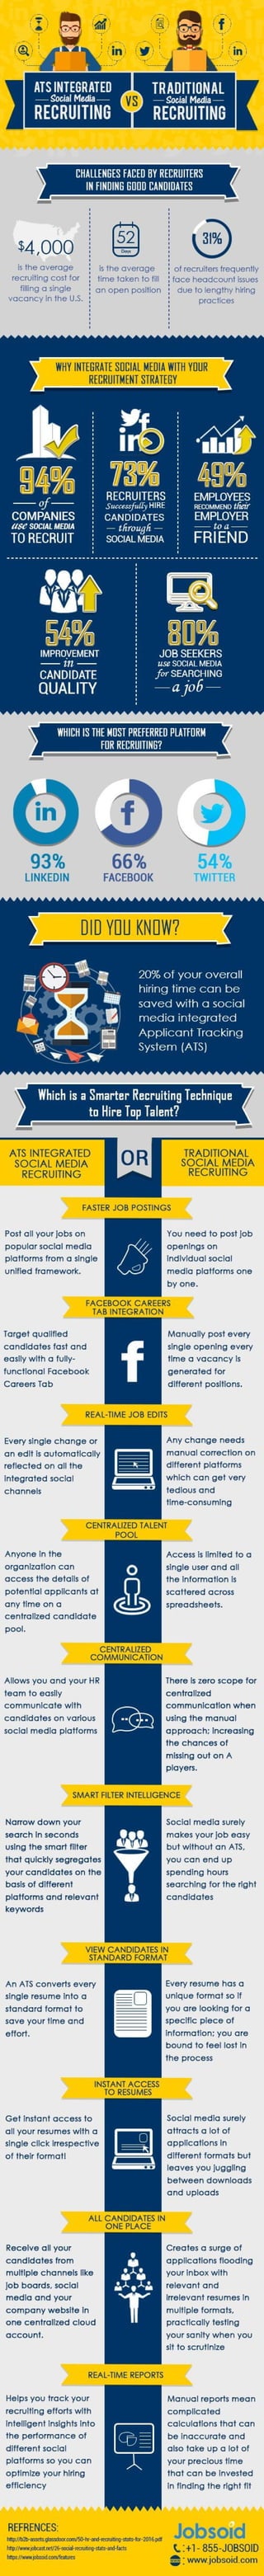 Challenges faced by Recruiters in finding Good Candidates